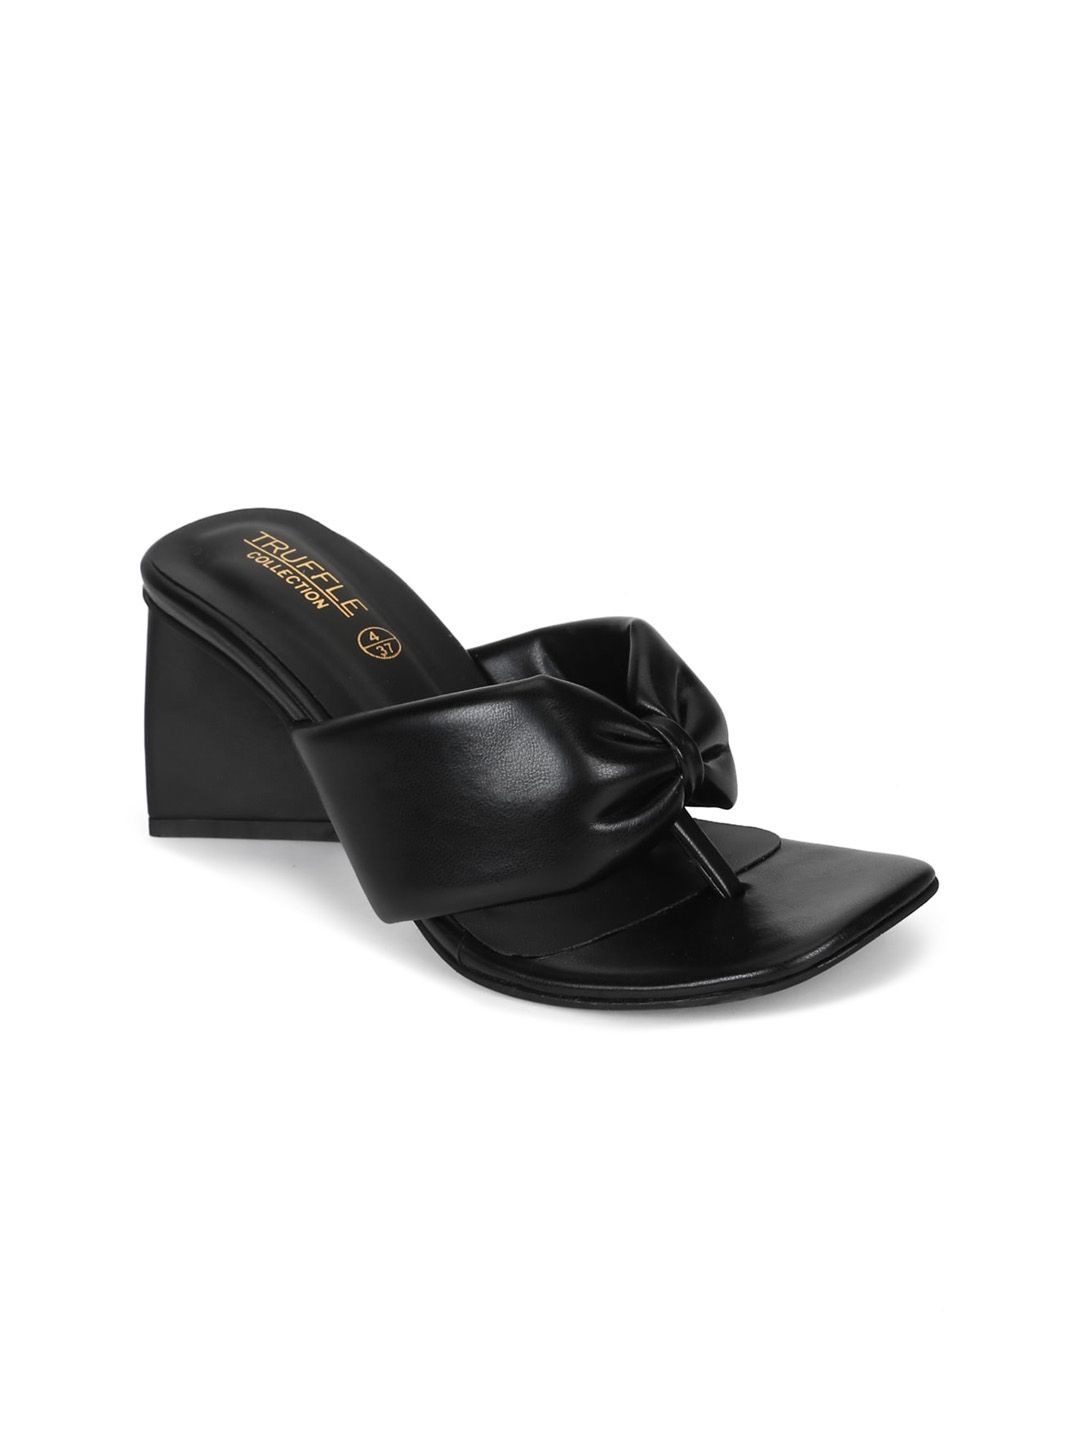 Truffle Collection Women Black PU Block Sandals with Bows Price in India